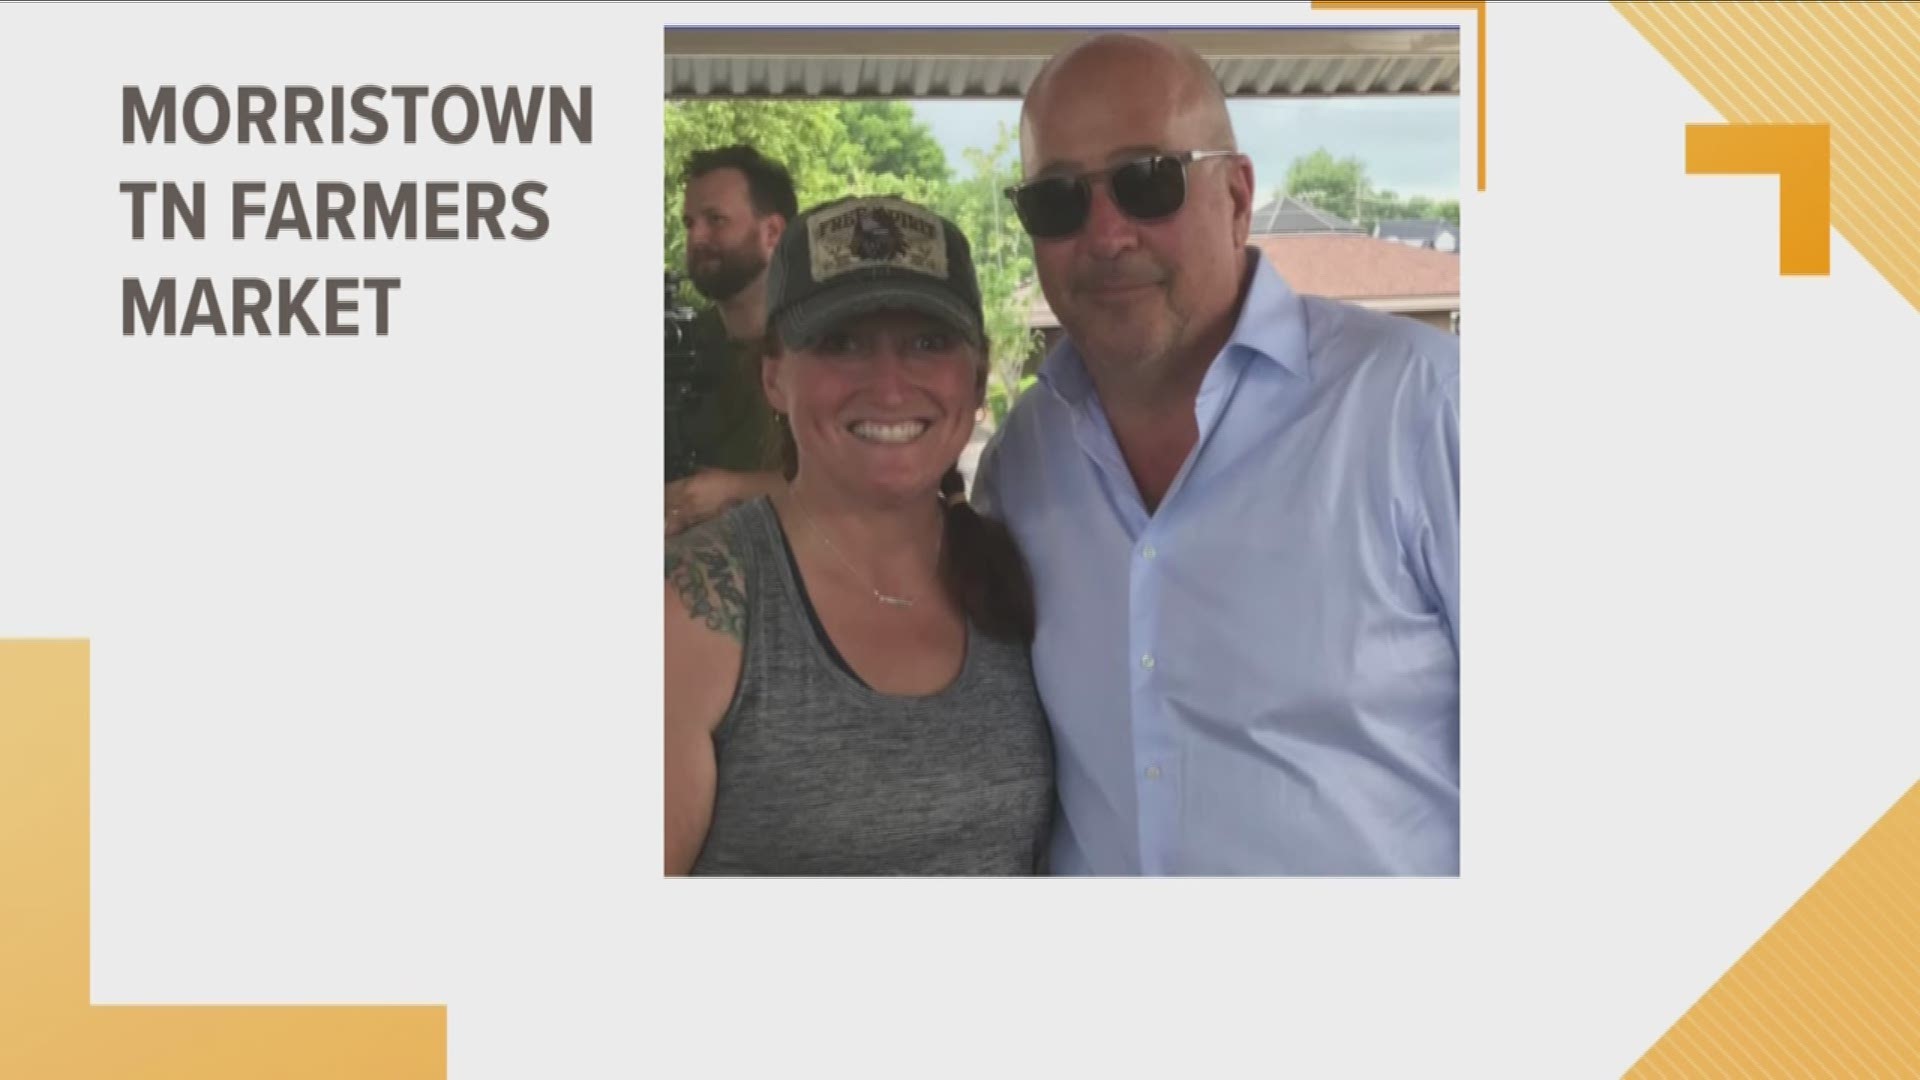 In Hamblen County, people at the Morristown Farmers Market got an unexpected surprise when Chef Andrew Zimmern from the Travel Channel and Food Network showed up!